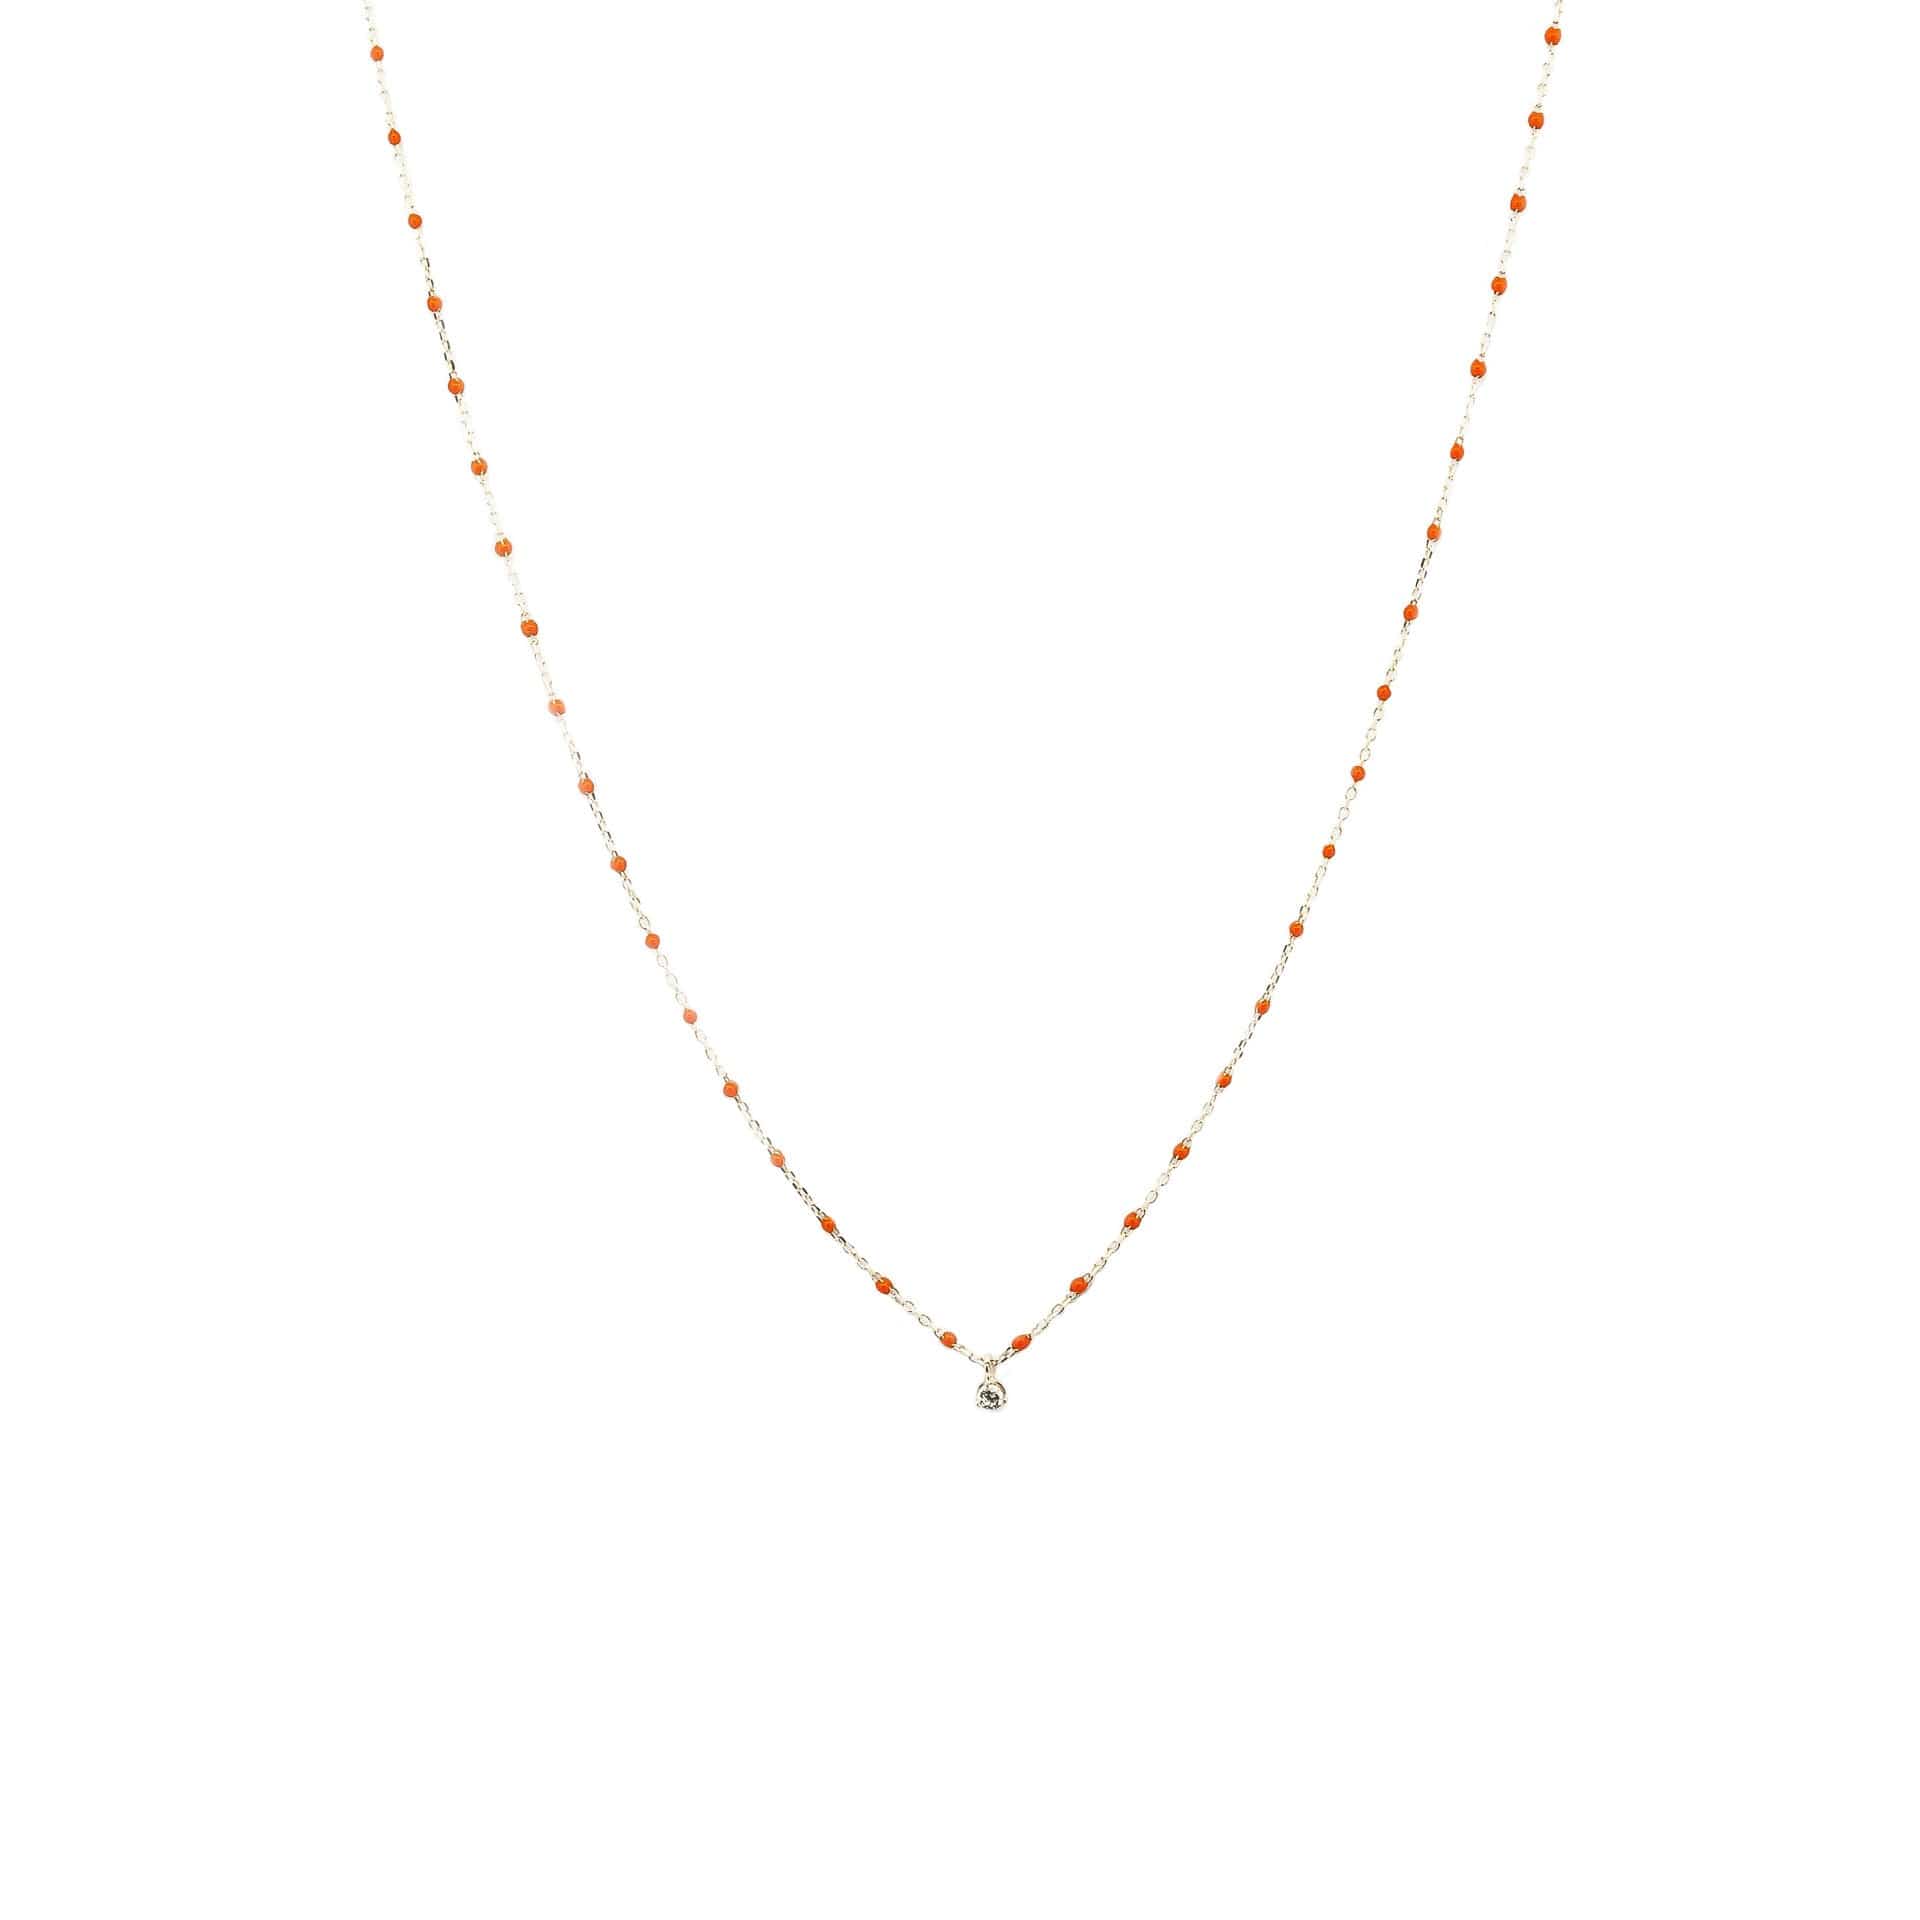 TAI JEWELRY Necklace Sterling Silver Enamel Beaded Necklace With Cz (Orange)